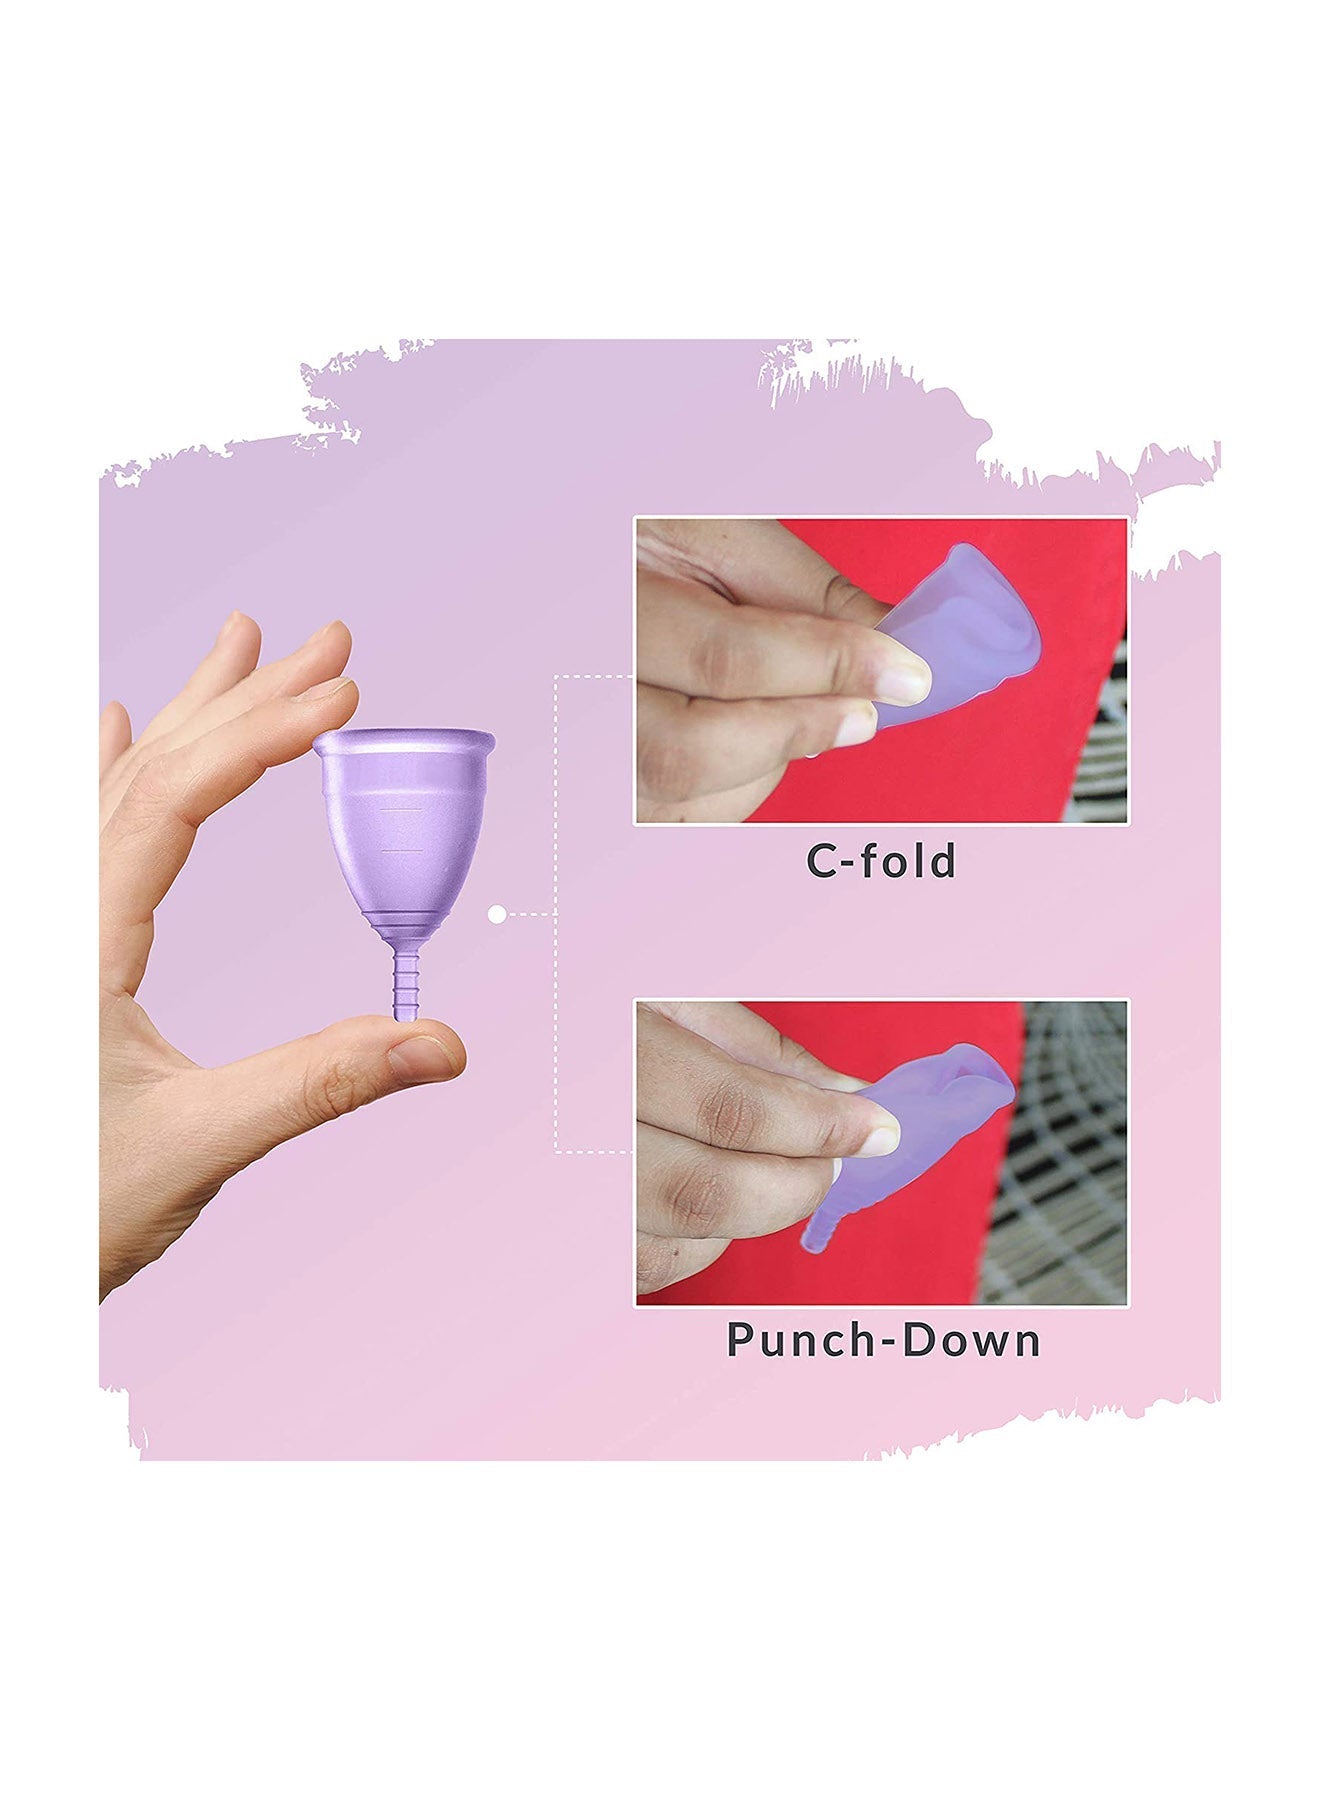 Sirona Pad Free Periods Menstrual Cup for Women Medium Value Pack of 3 